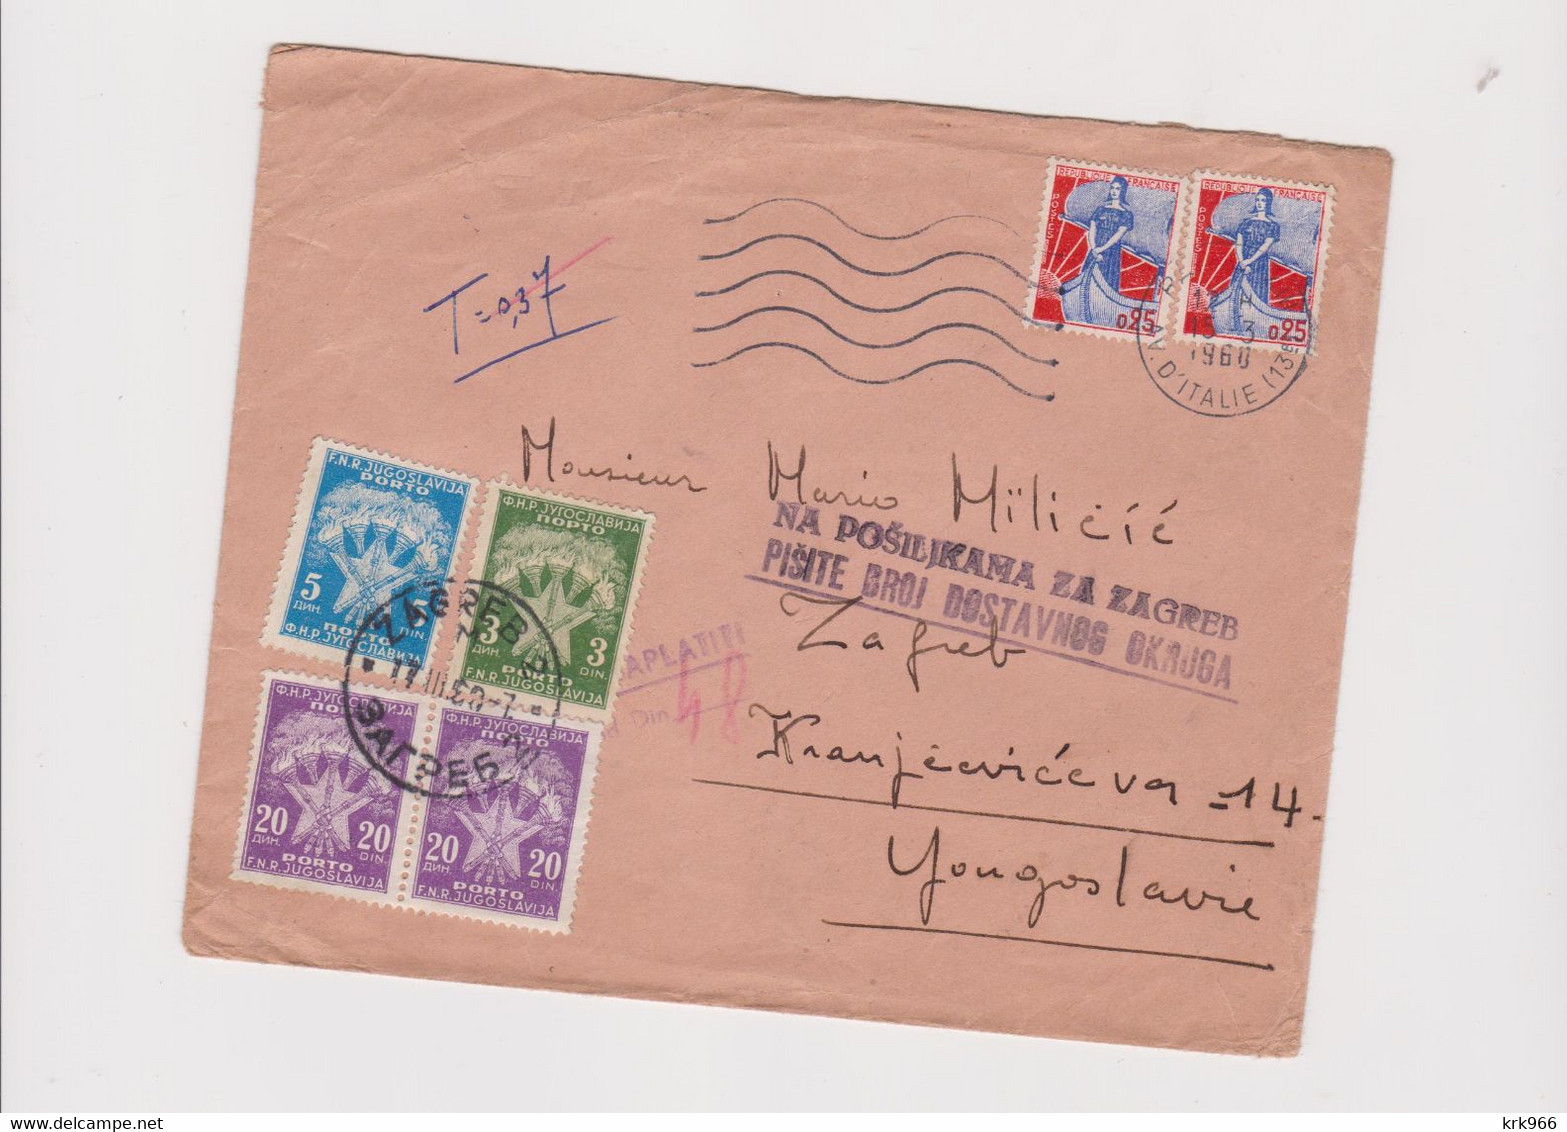 FRANCE 1960 Nice Cover To Yugoslavia Postage Due - Covers & Documents